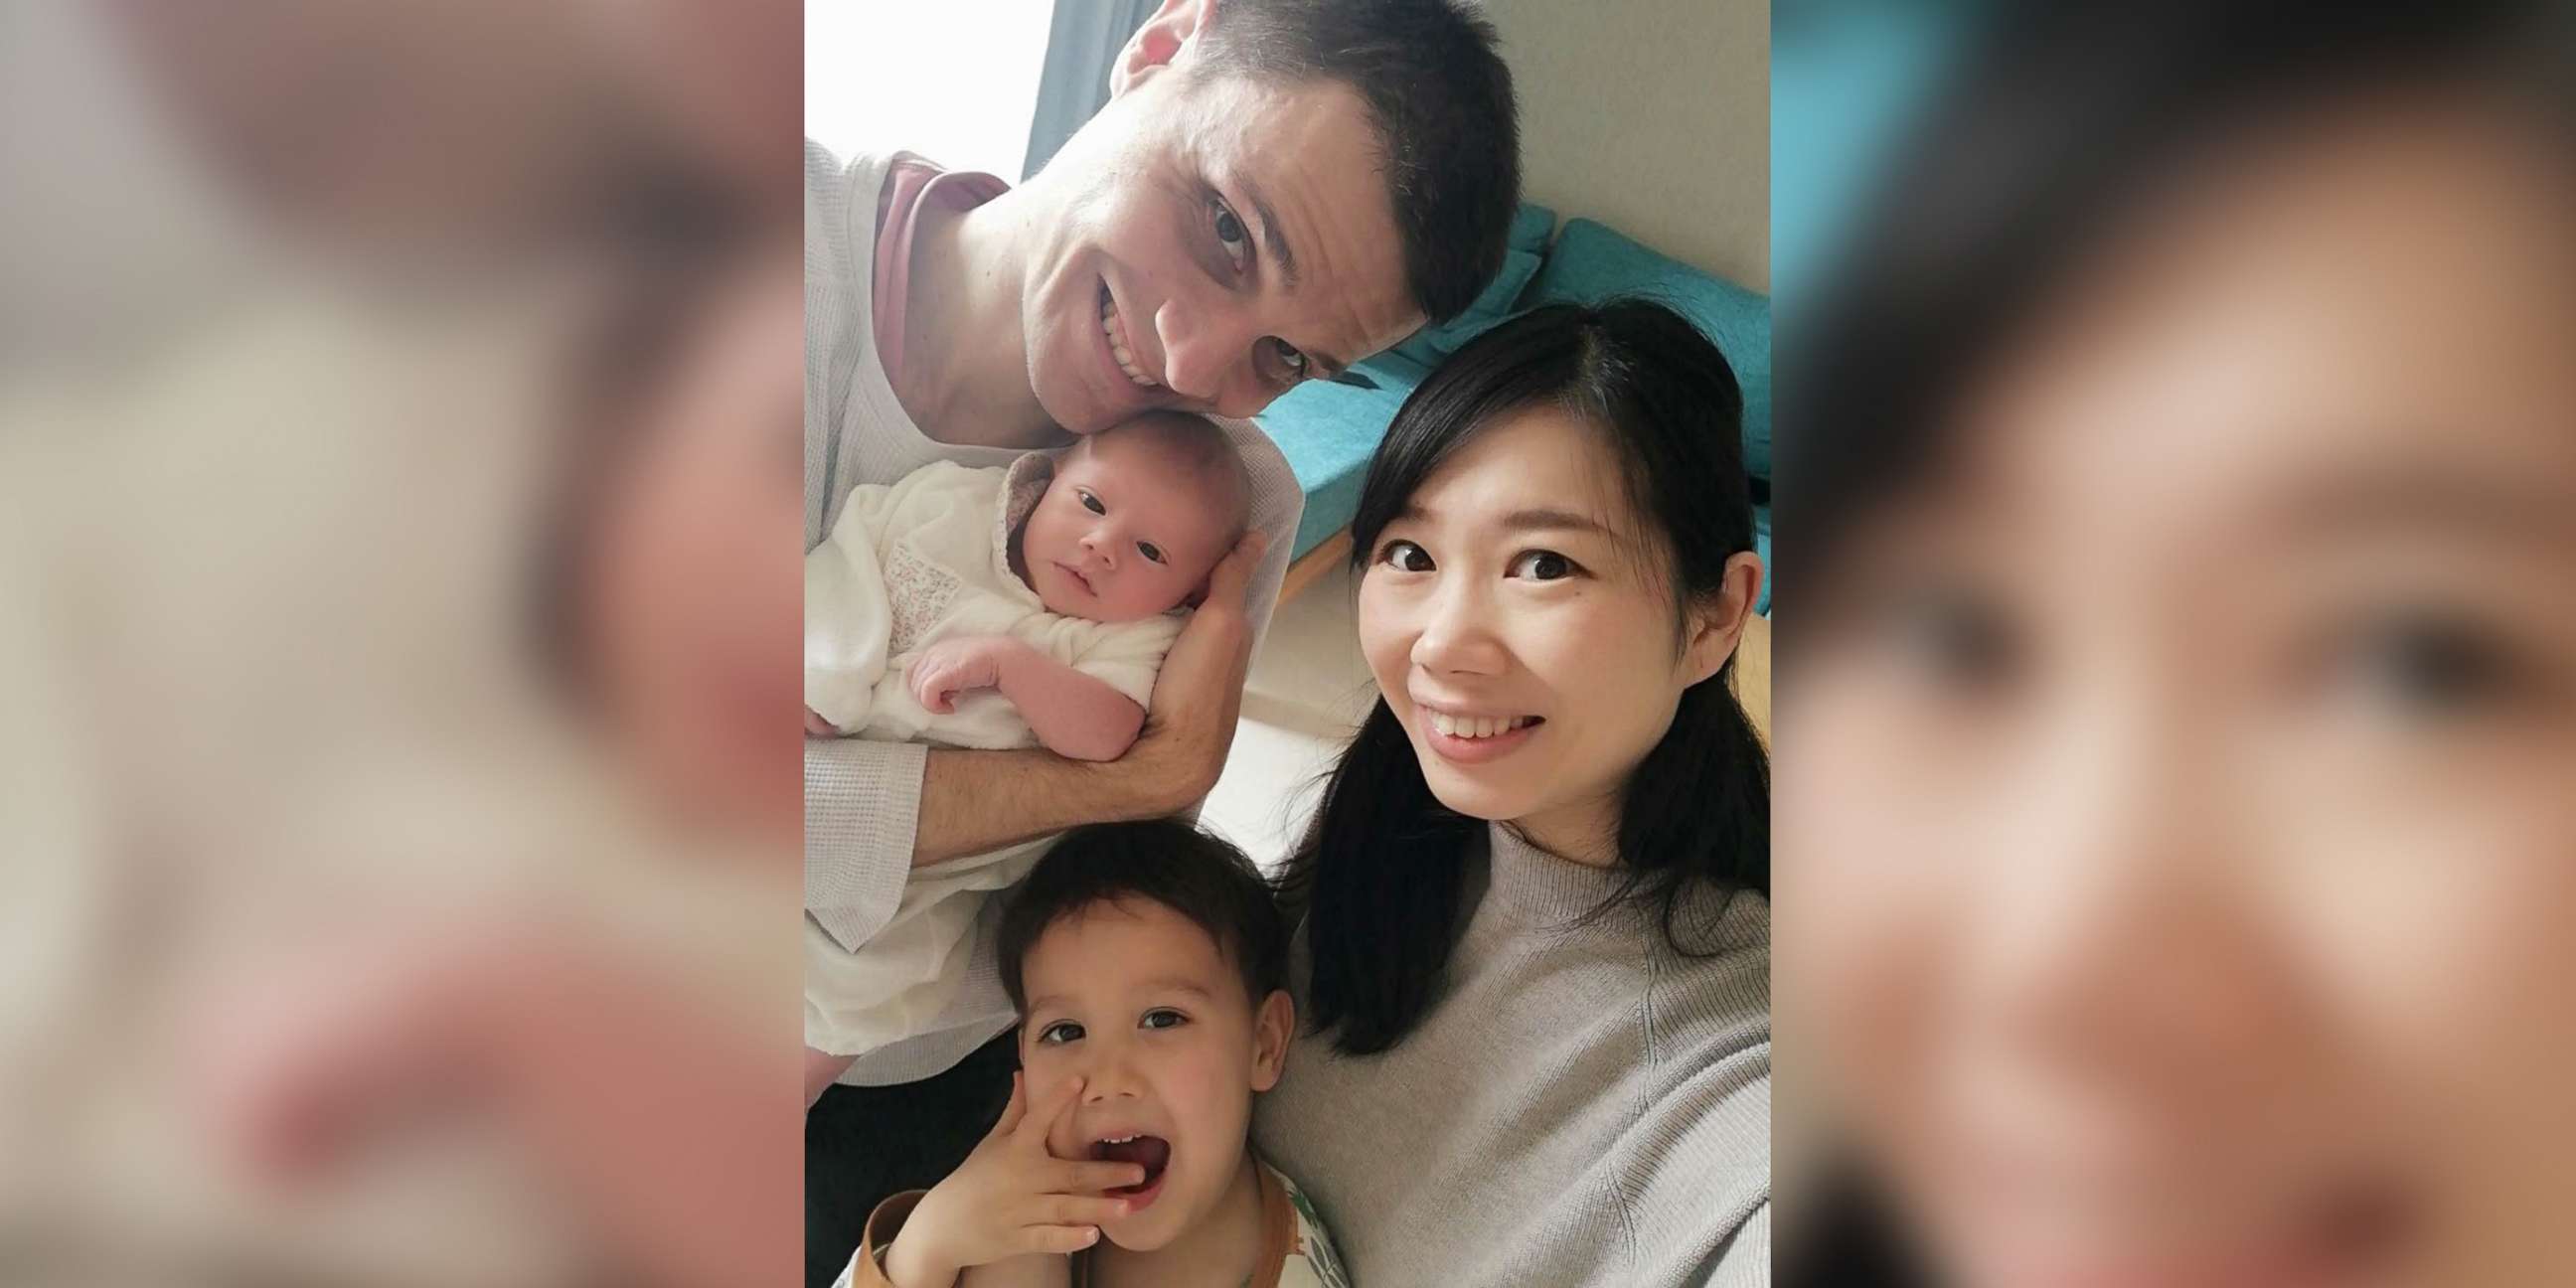 PHOTO: Ben Van Overmeire and Mio Goto were living in Suzhou, China, amid the novel coronavirus outbreak when Goto gave birth to her second child, Yue.